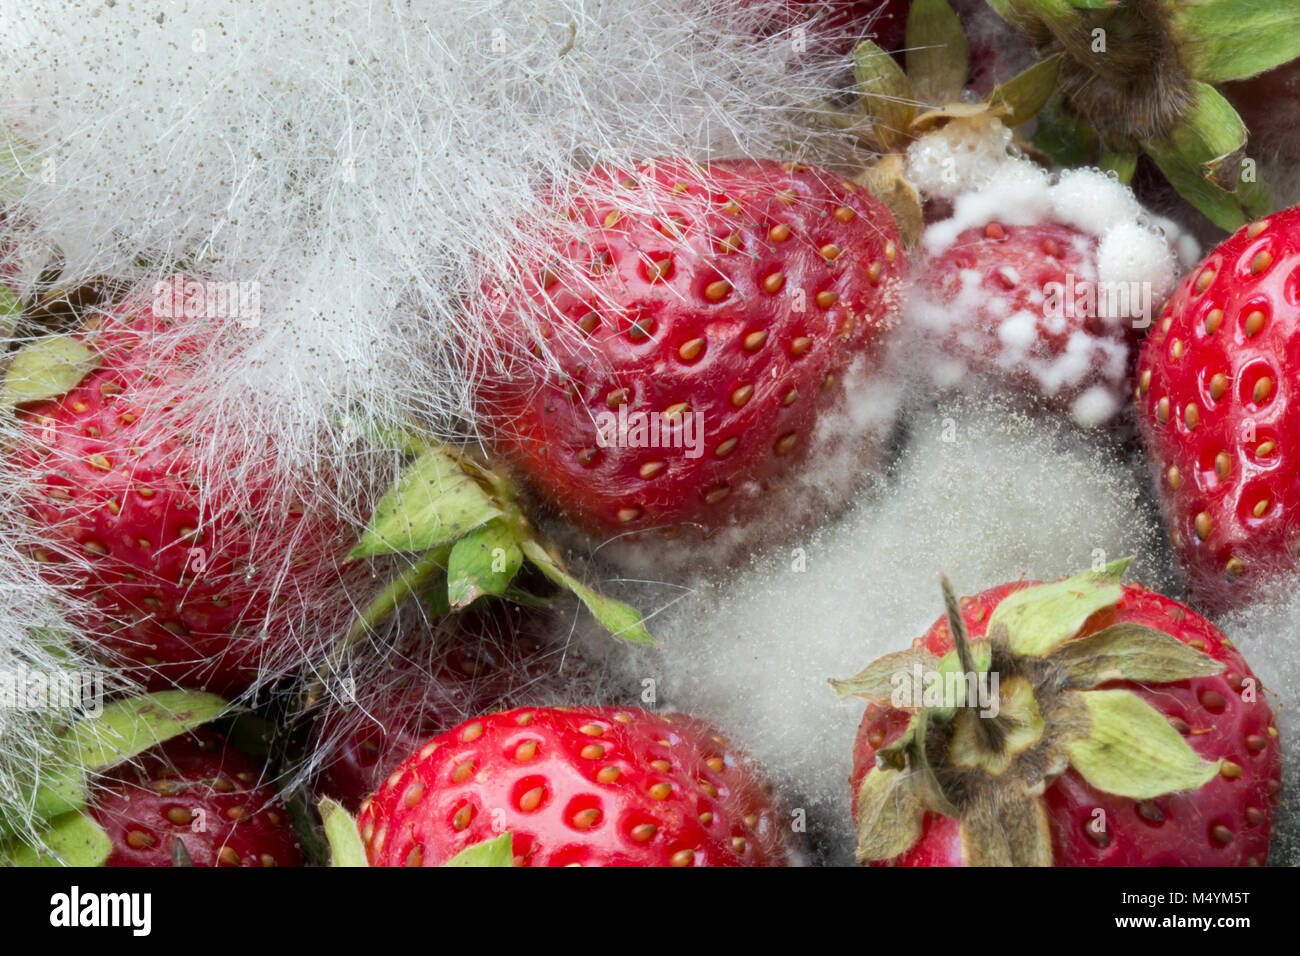 Rotting strawberries with fungus growing. Stock Photo